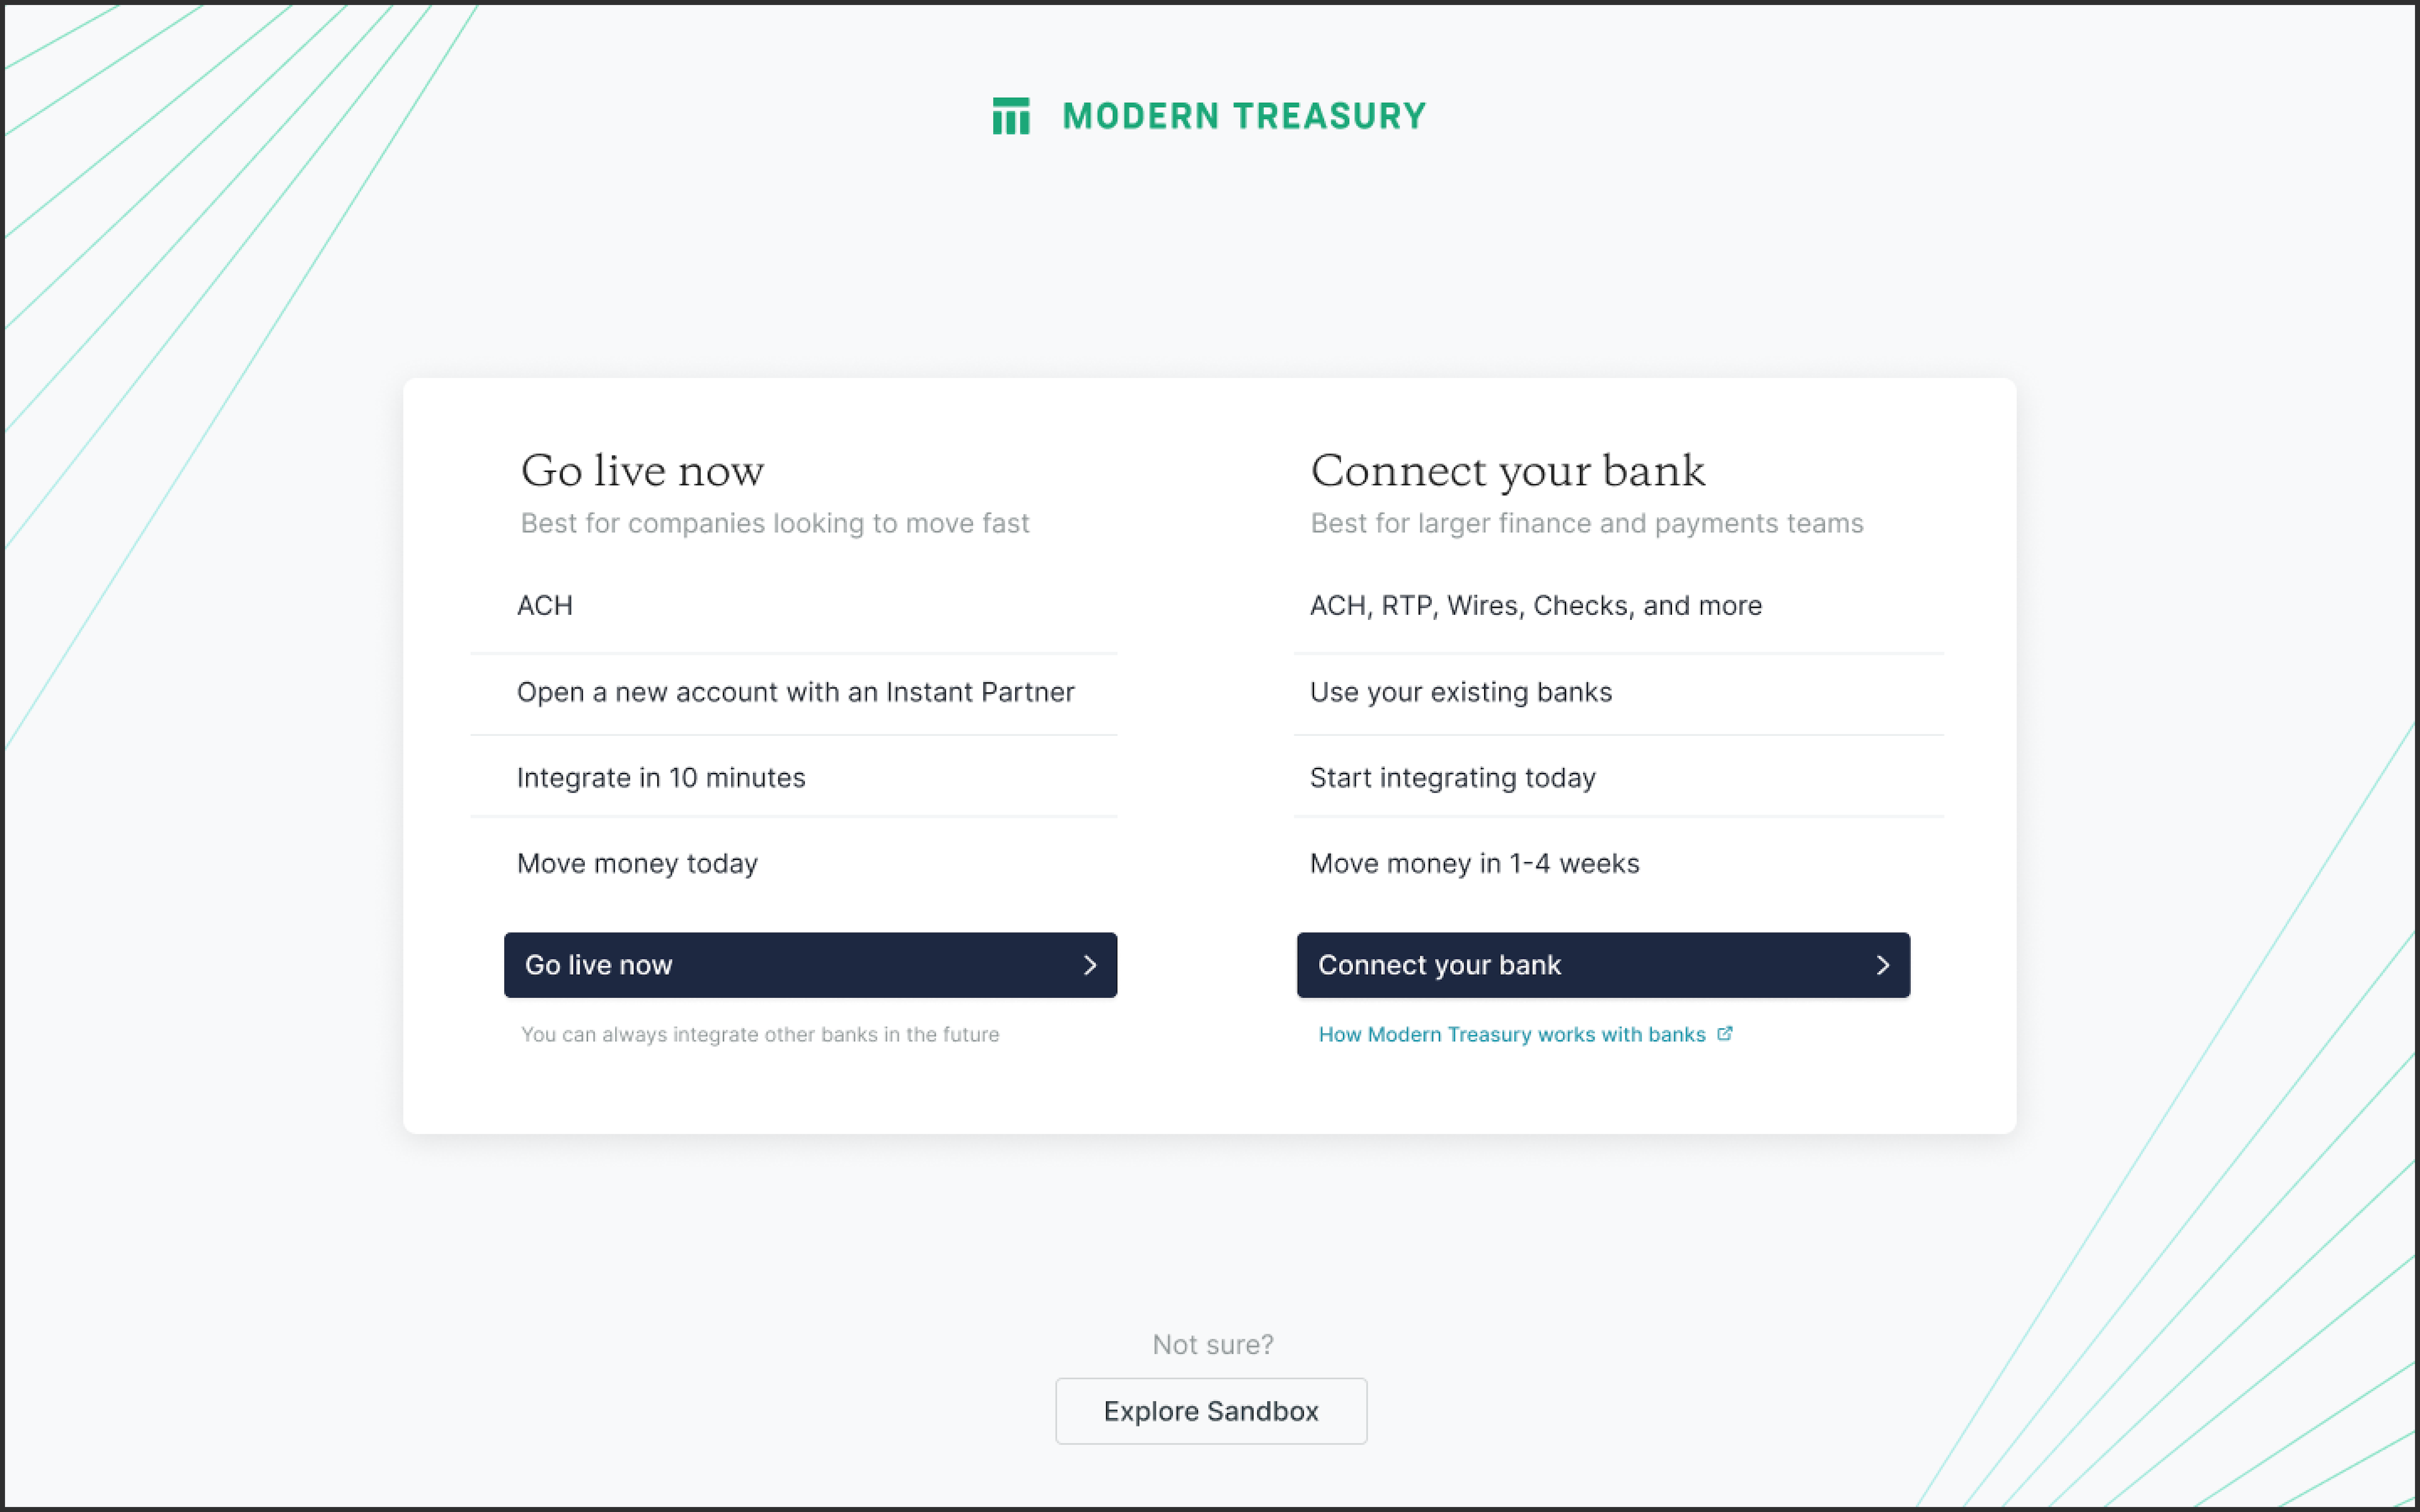 Screen: Go live now or connect your bank